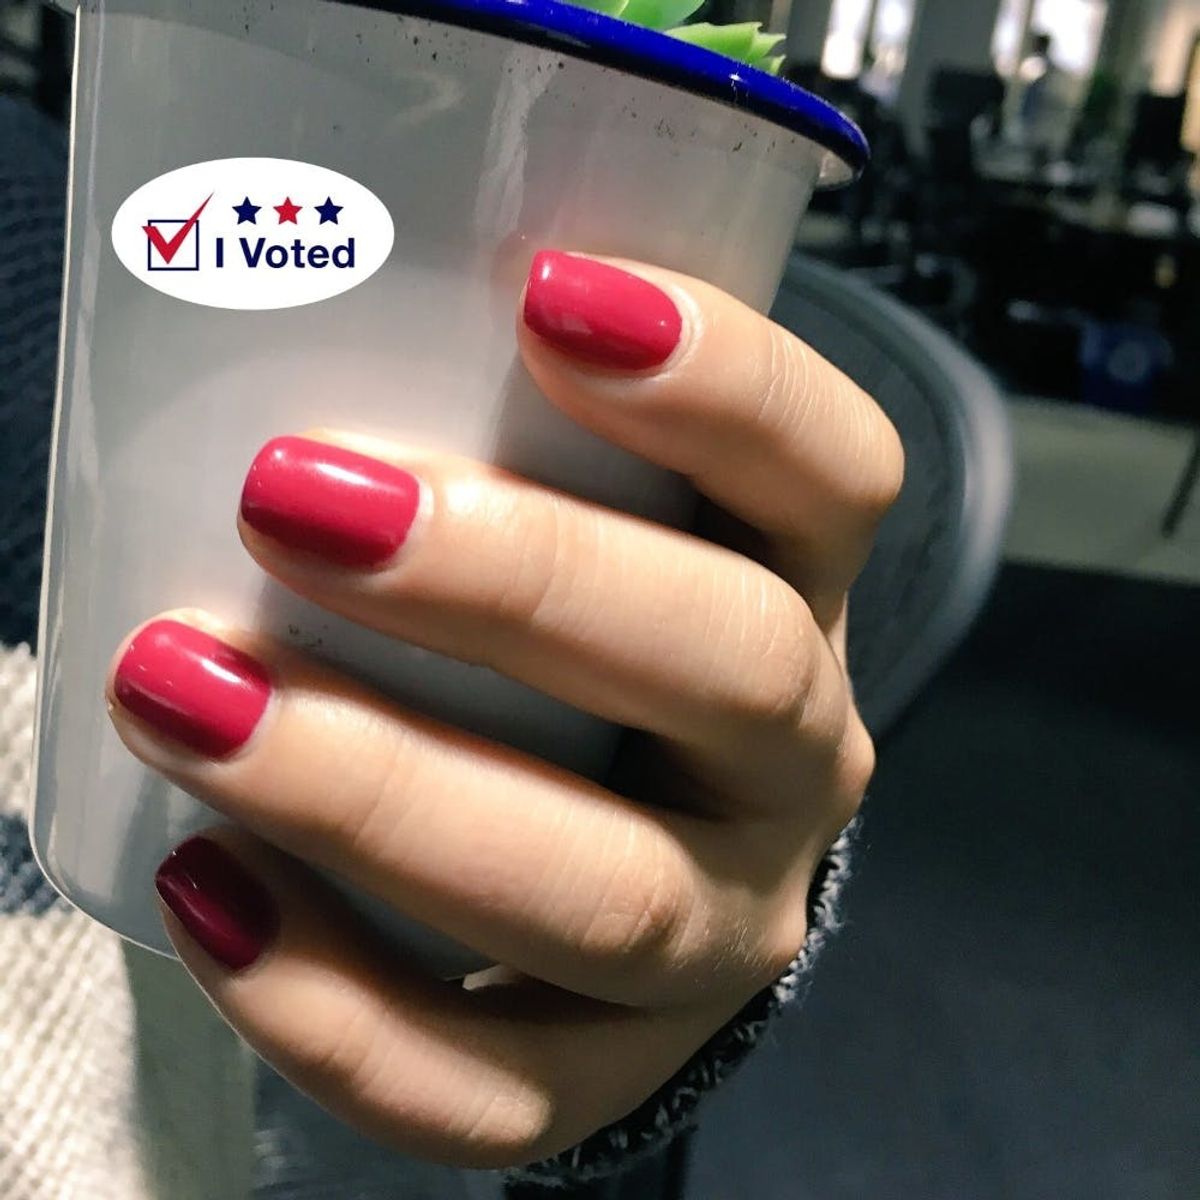 Find Out Why Women Are Wearing This Very Specific Shade of Nail Polish to Vote